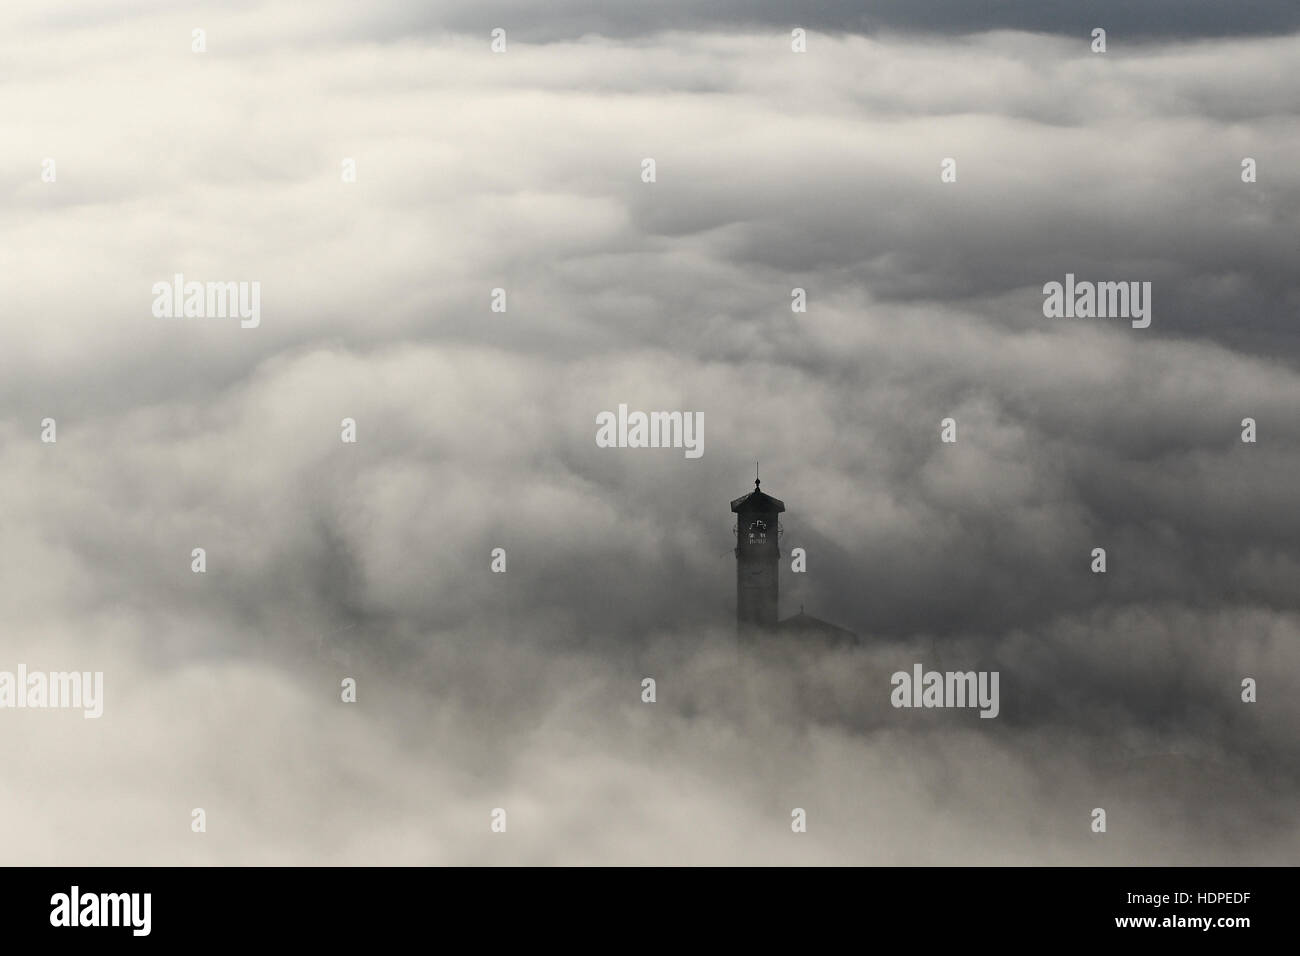 Aerial view of church steeple peeking out of winter fog background Stock Photo